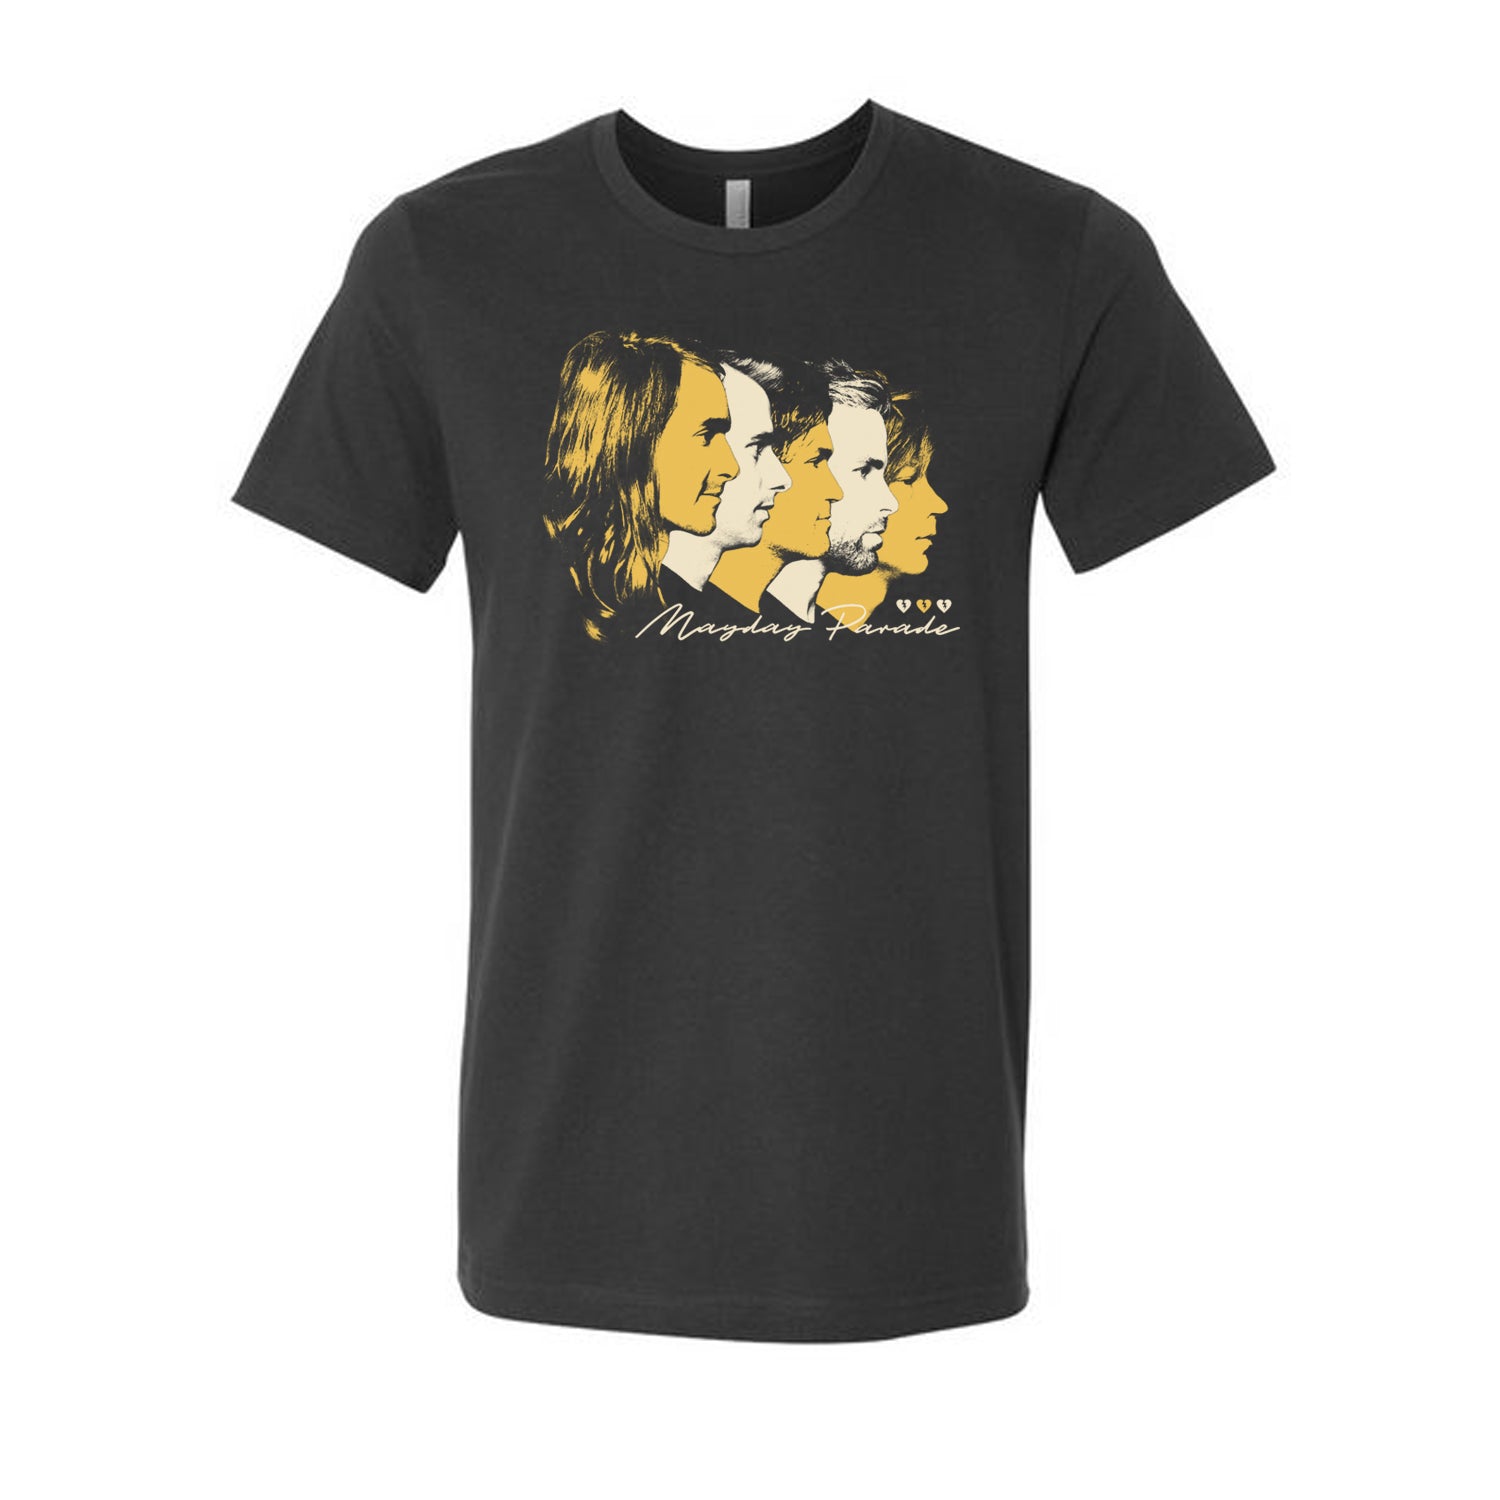 image of a dark grey tee shirt on a white background. tee has full chest print in alternating yellow and cream print of five faces looking right at says mayday parade on the bottom